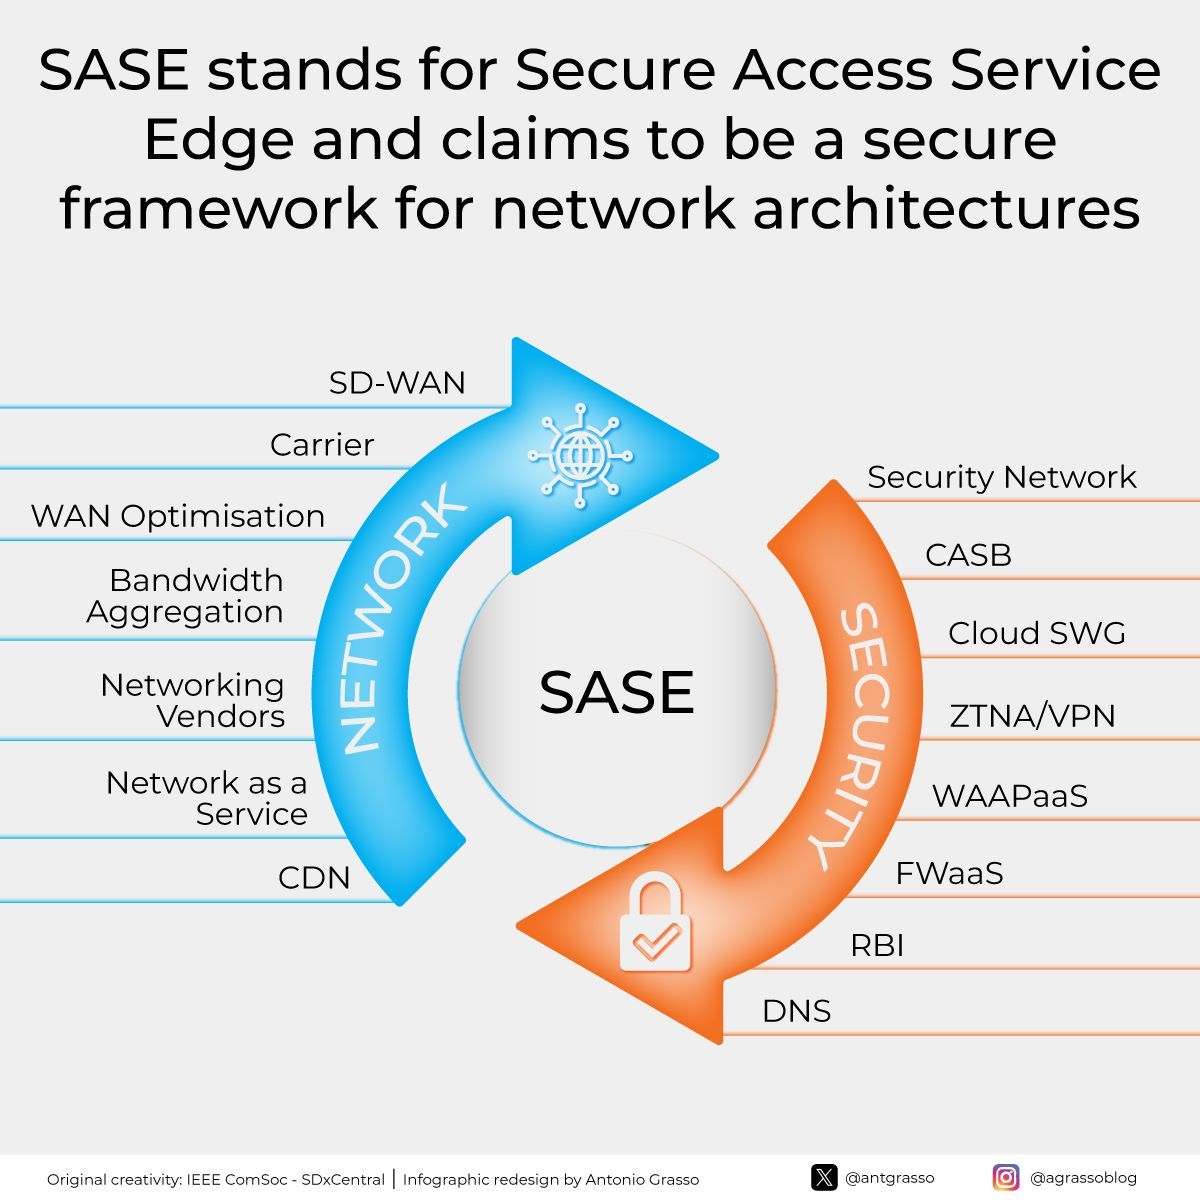 The transition towards the Post-Digital Age is expected to be seamless, provided security challenges are addressed effectively. Digital boundaries continue to expand, and cyber attacks grow, but the promise of Secure Access Service Edge (SASE) is attractive. Microblog @antgrasso